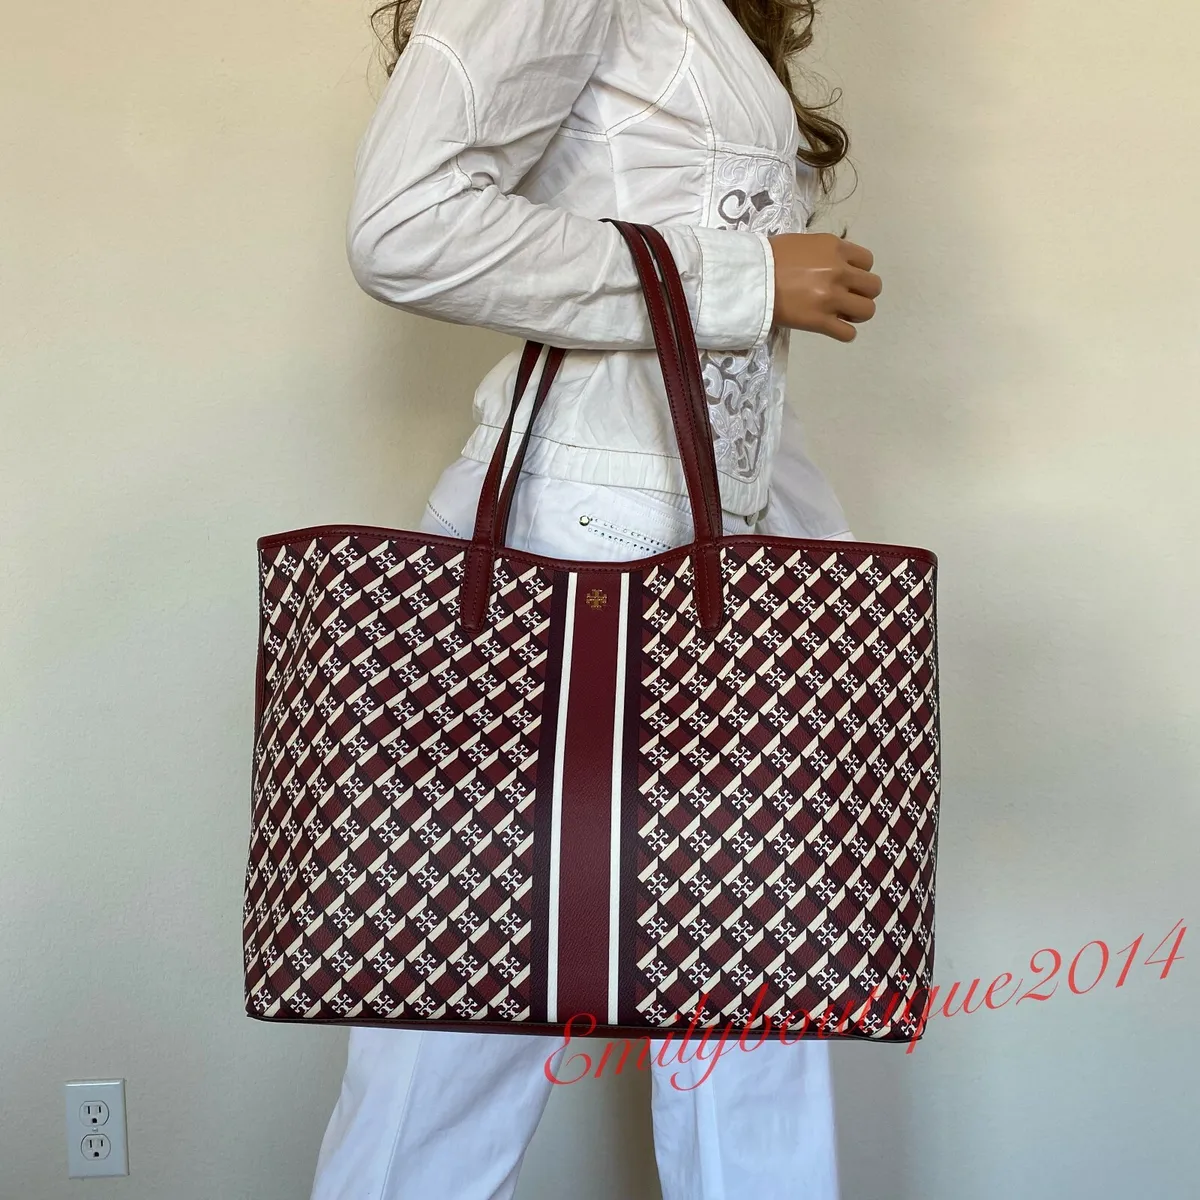 Tory Burch Brown, Pattern Print Coated Canvas Tote Bag